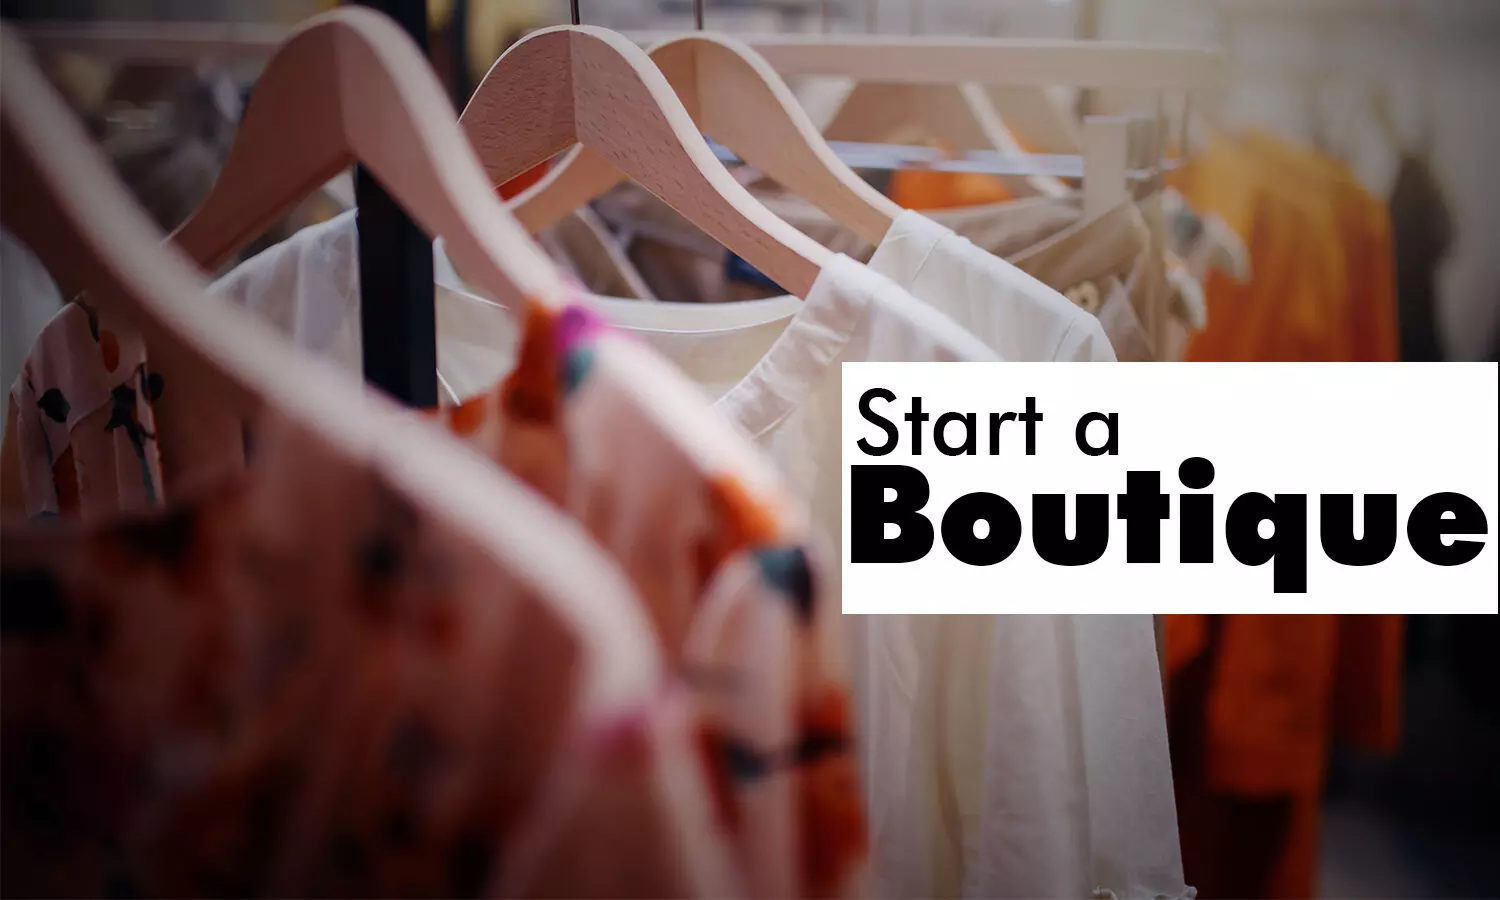 About the Law Talks on How to start a Boutique? What should you know to Start the Boutique